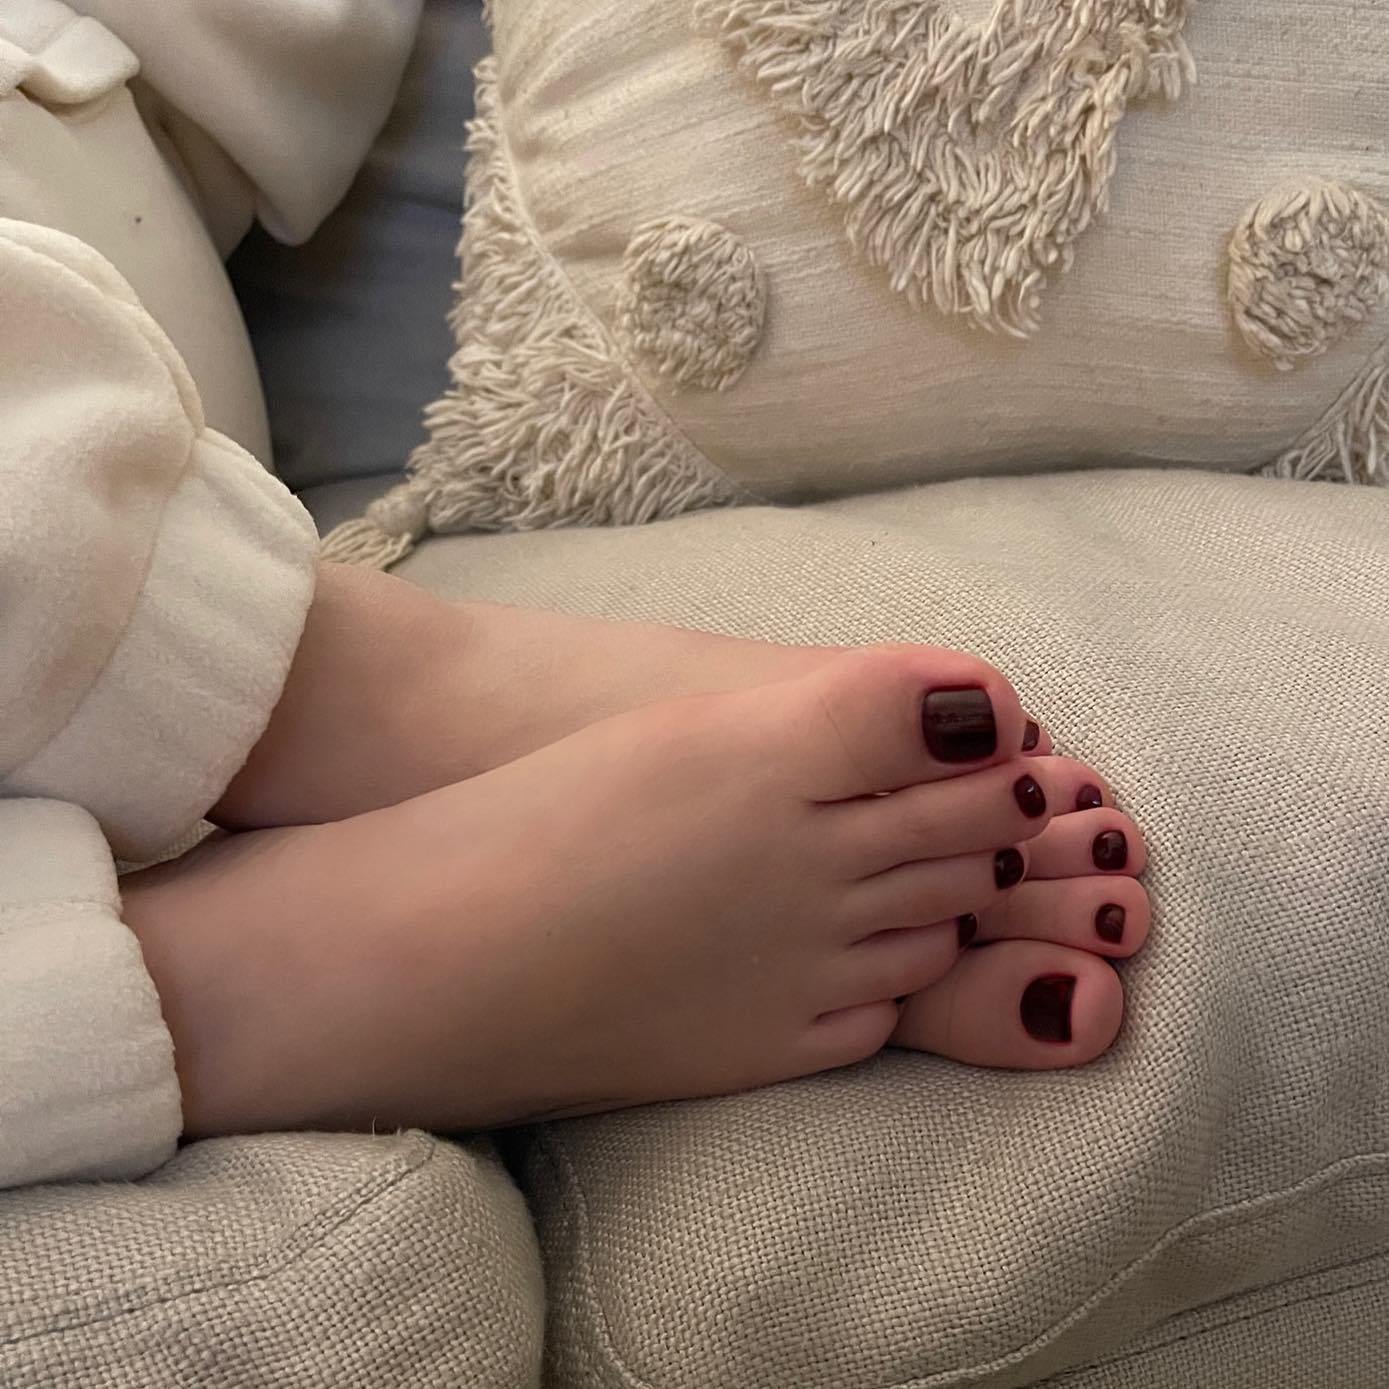 People who liked Selena Gomez's feet, also liked.